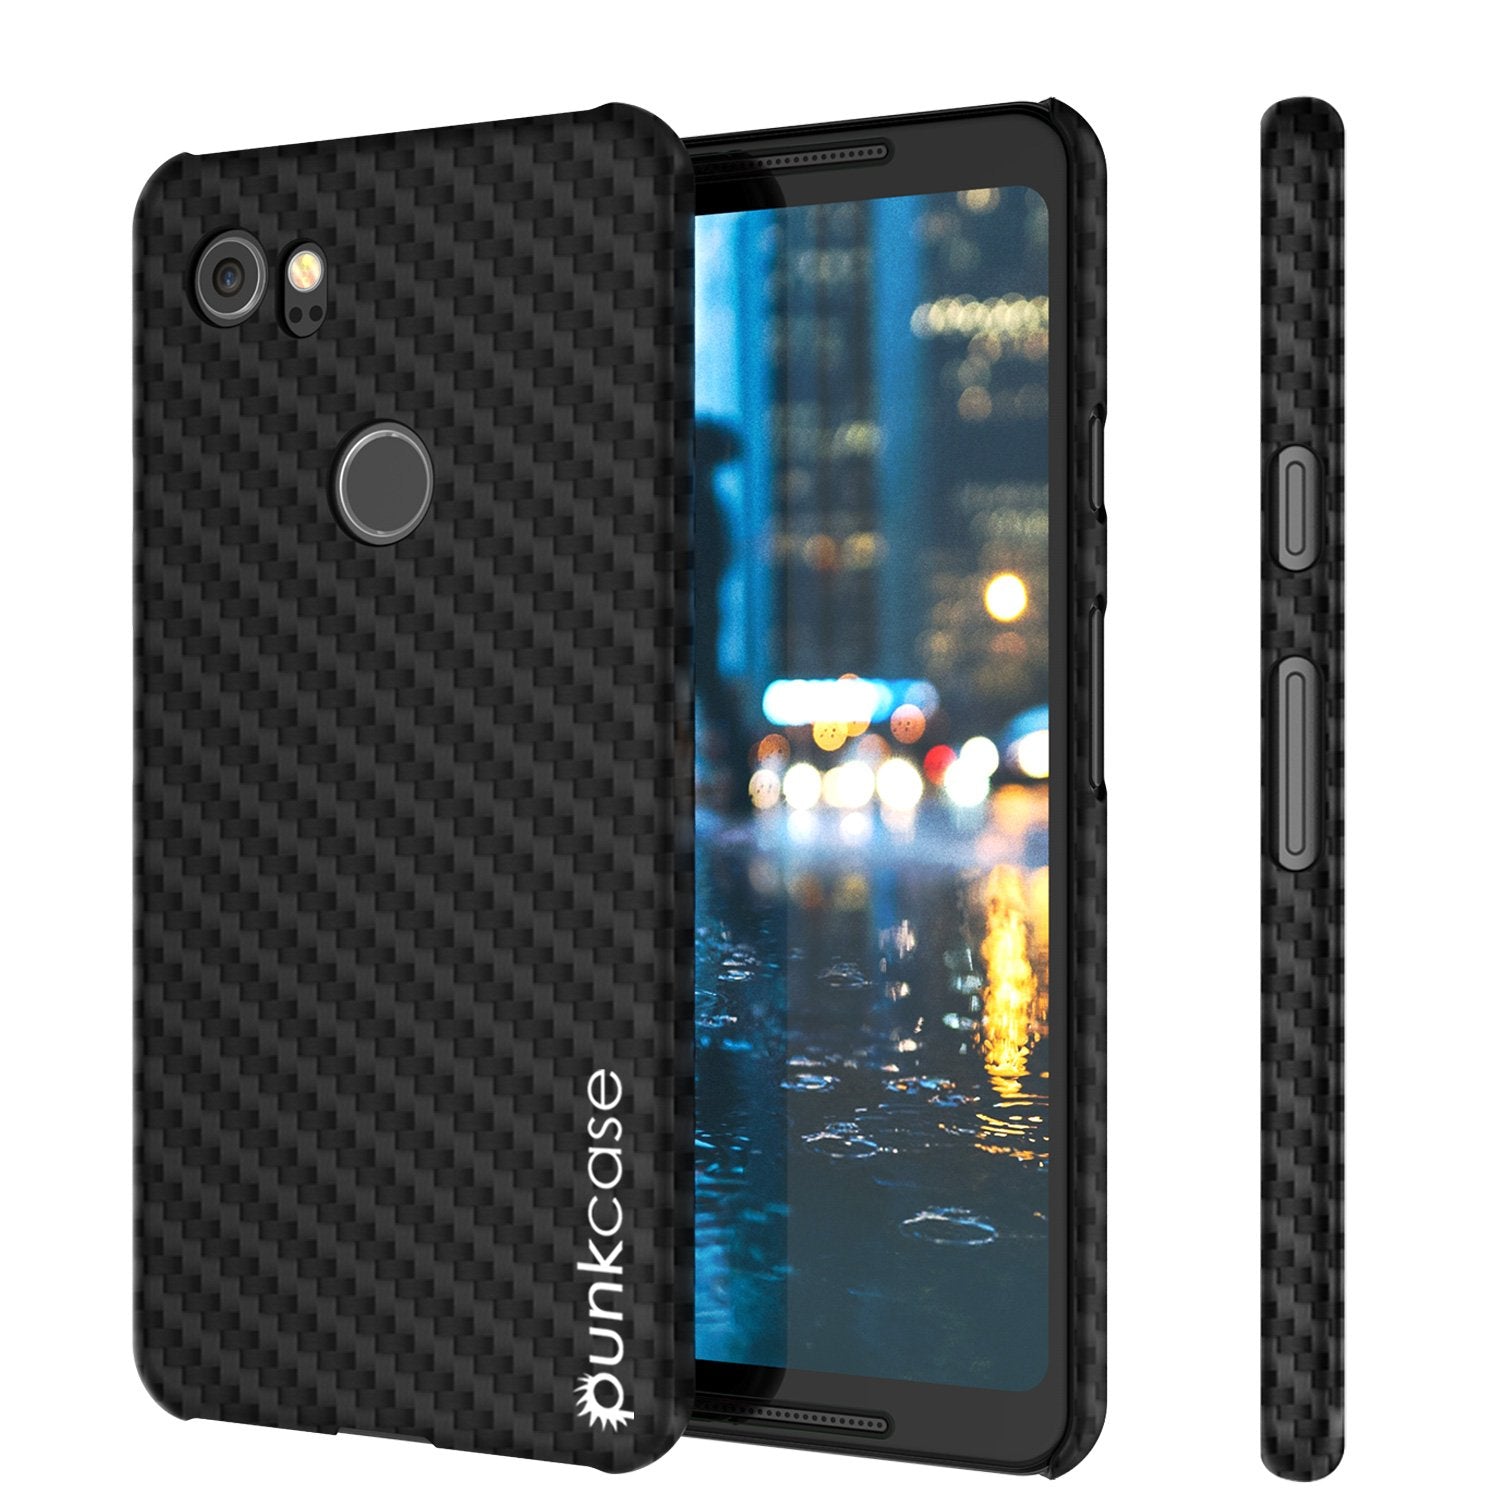 Google Pixel 2 XL  CarbonShield Heavy Duty & Ultra Thin 2 Piece Dual Layer PU Leather Cover [shockproof][non slip] with Tempered Glass Screen Protector for Google Pixel 2 XL [Jet Black]